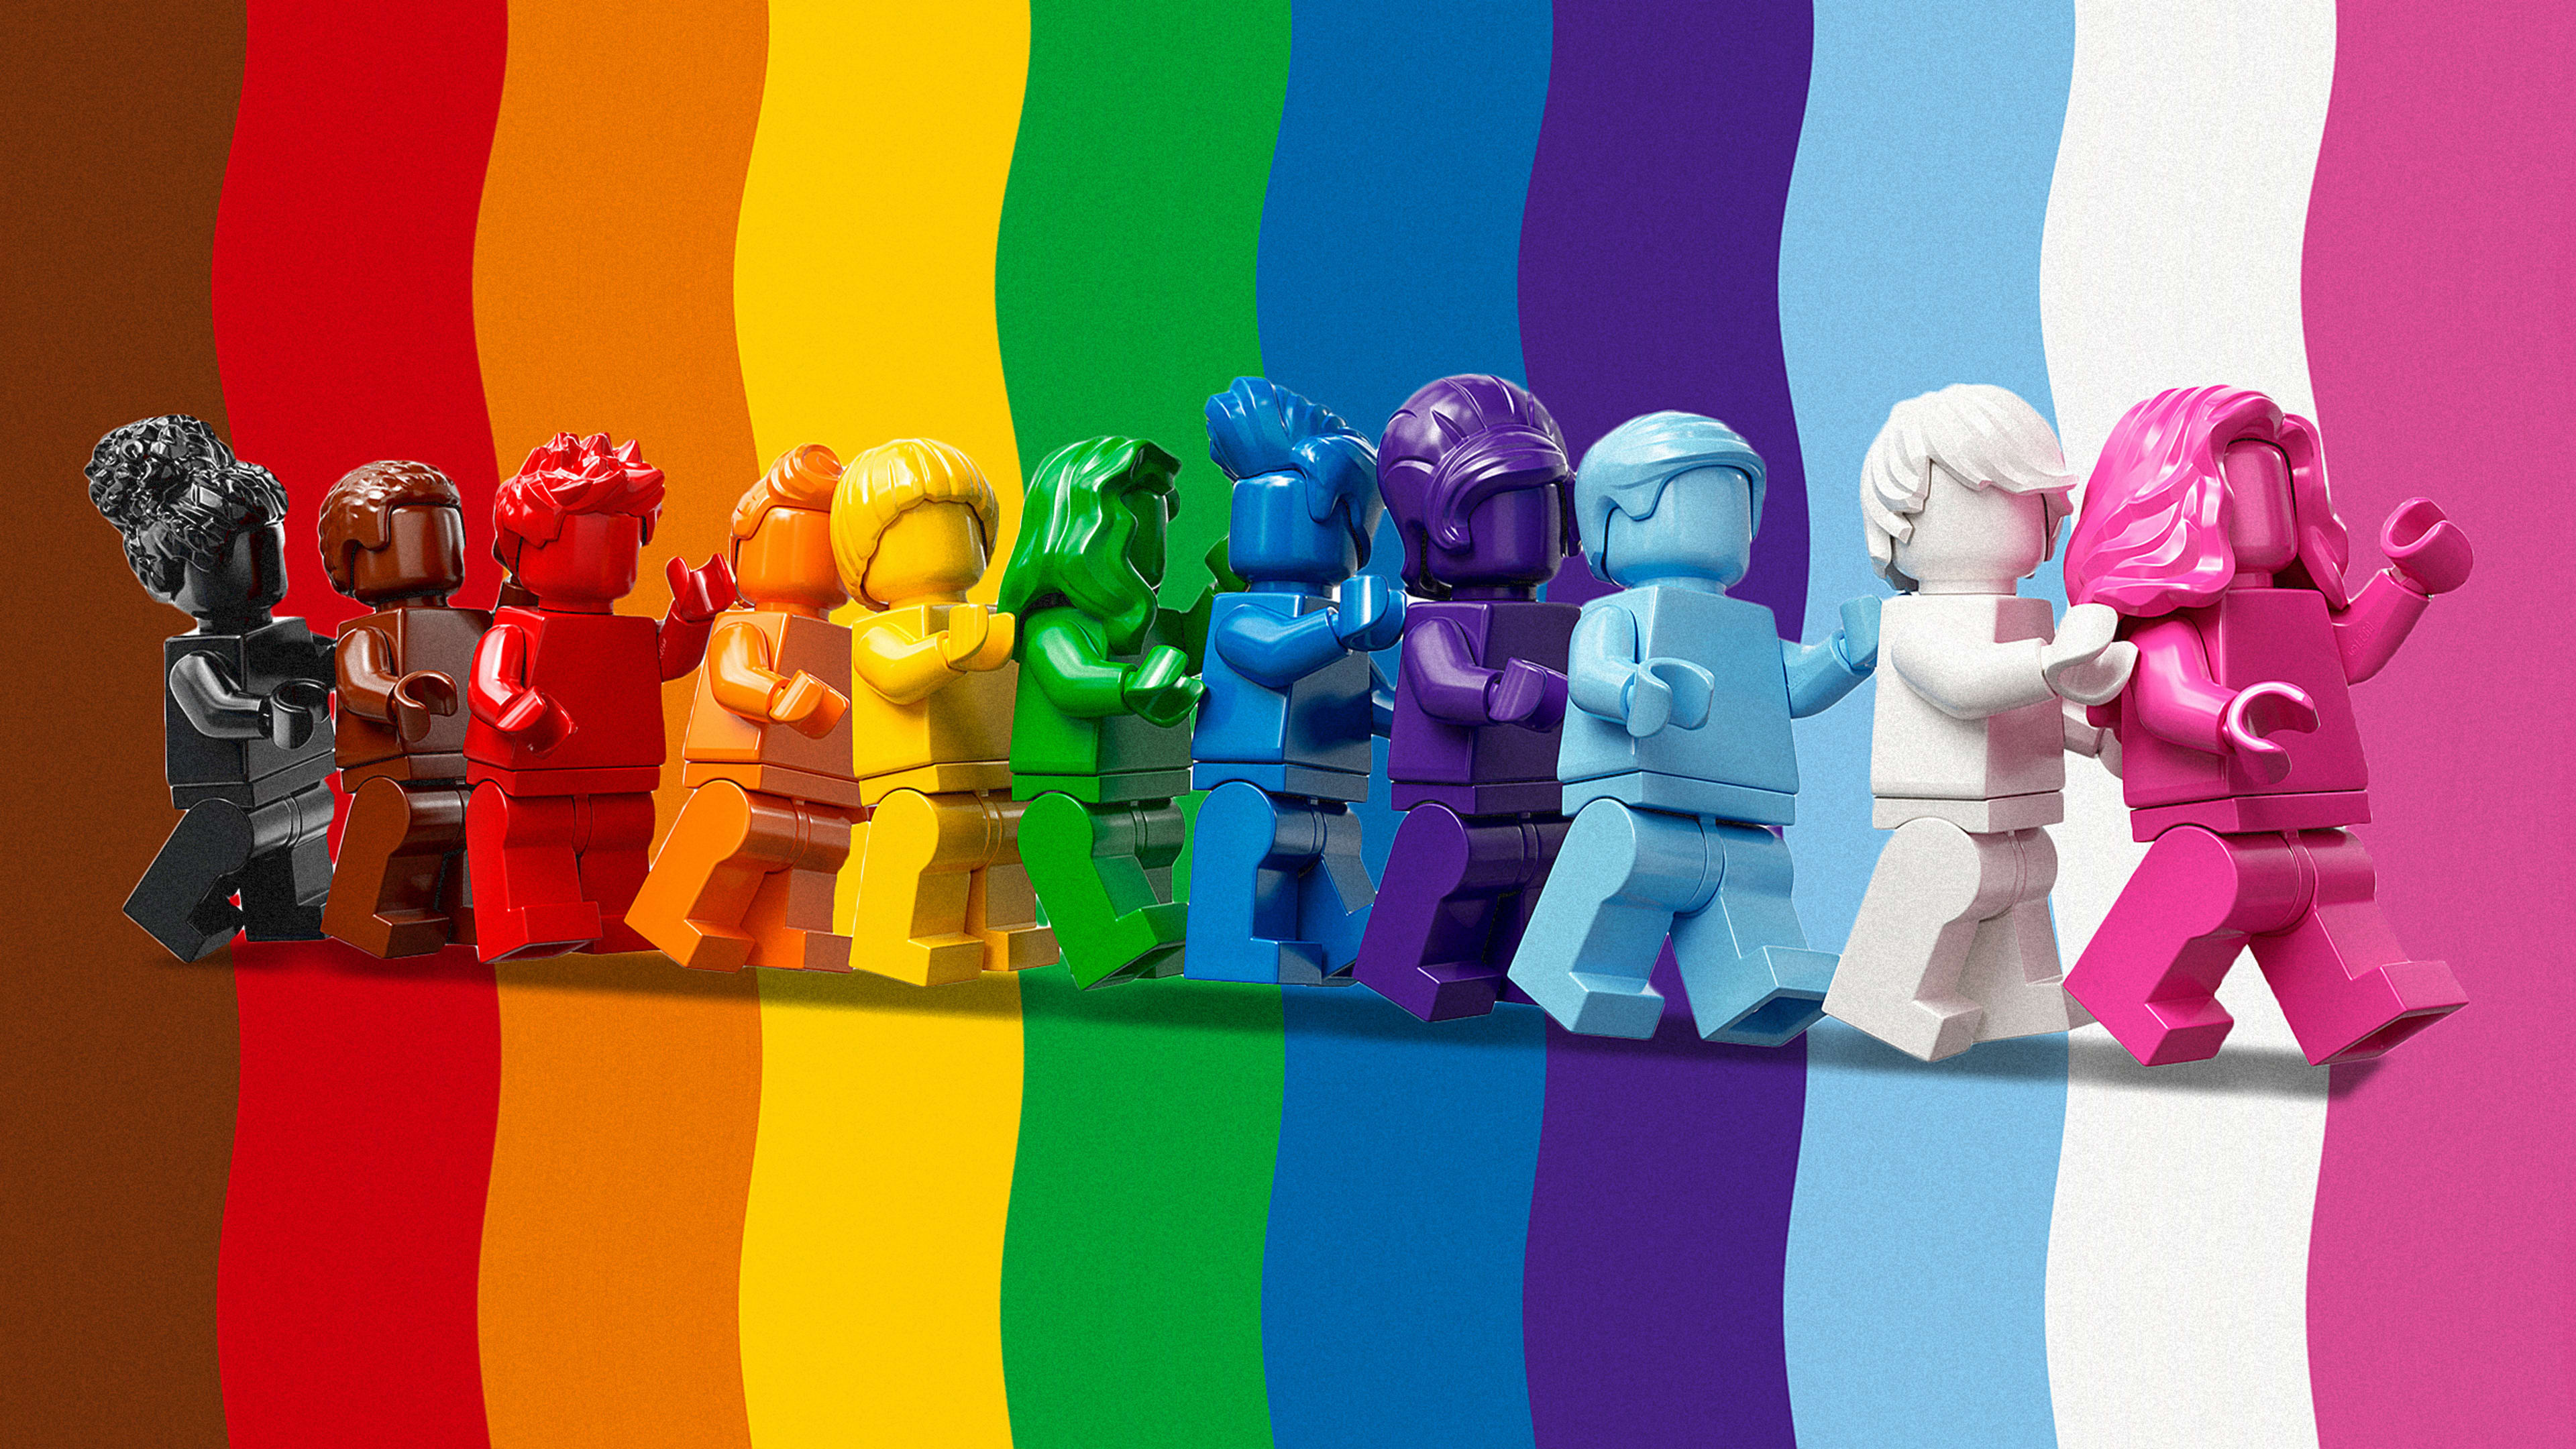 How childhood bullying inspired this Lego VP to design an LGBTQ set